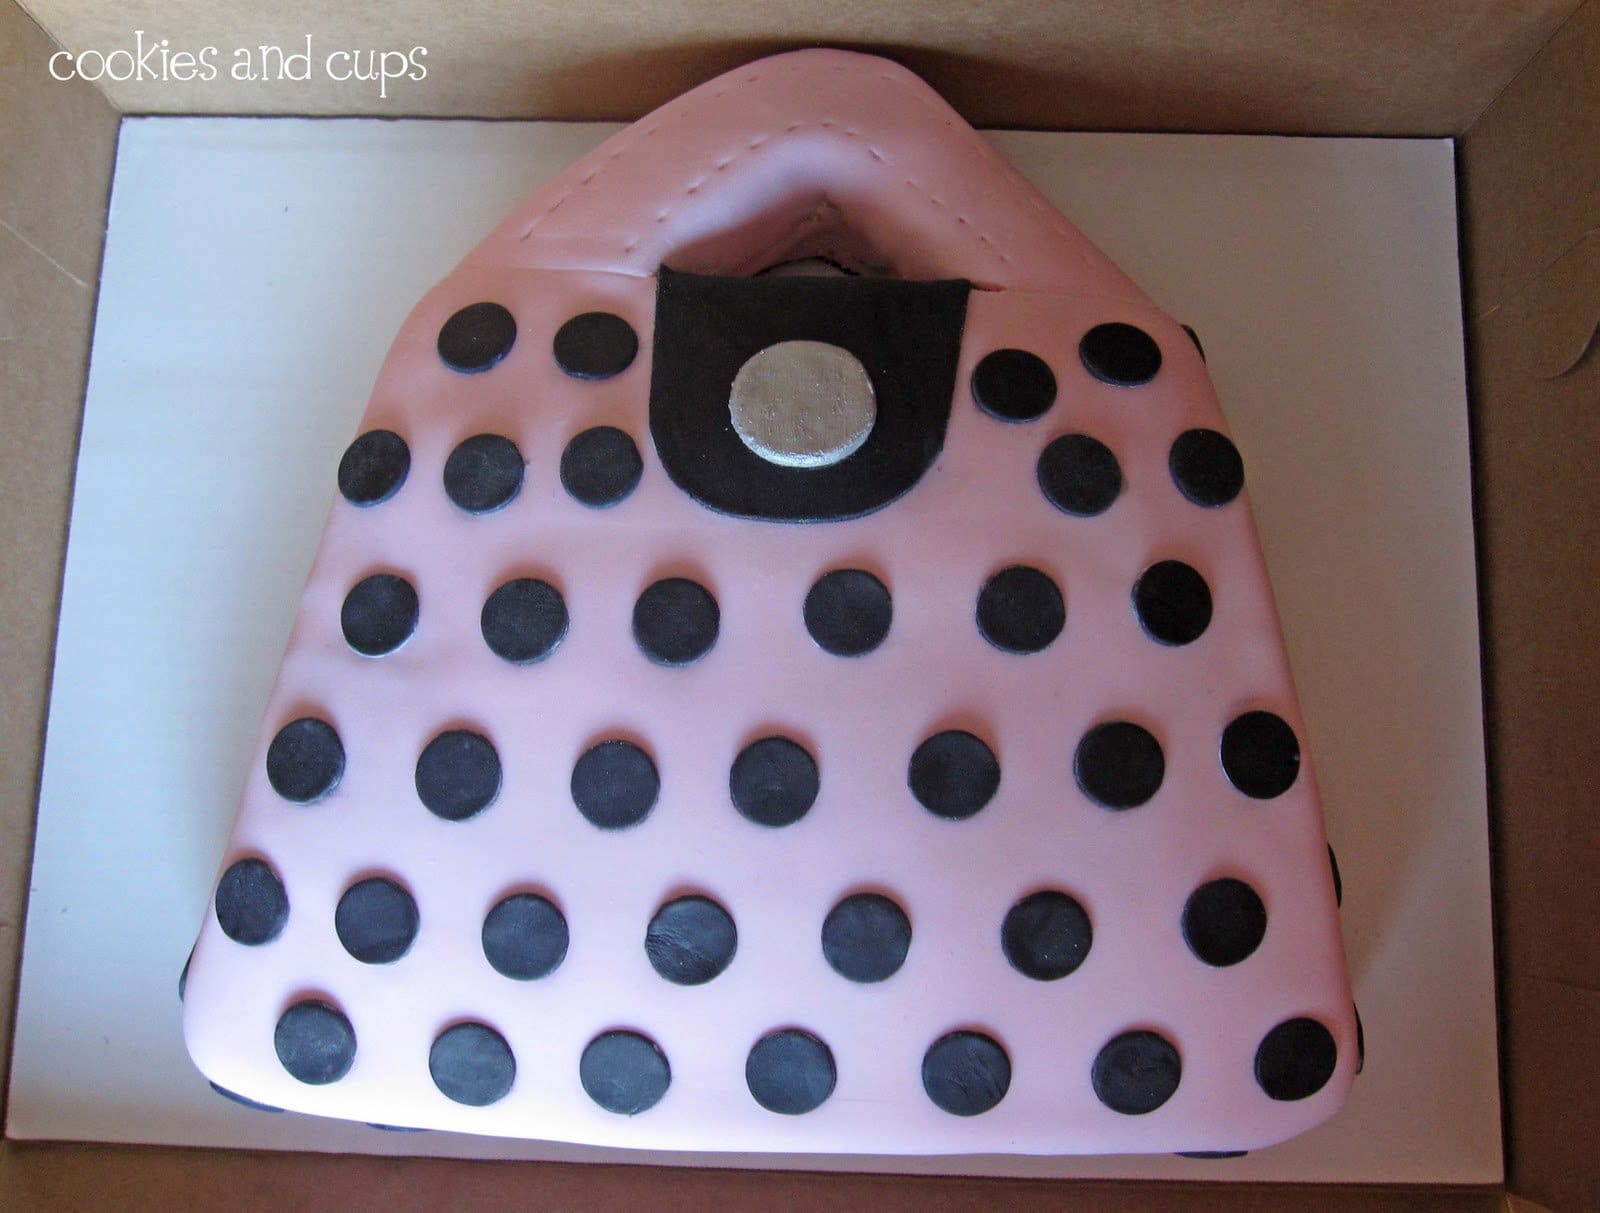 Top view of a cake decorated as a pink purse with black polka dots